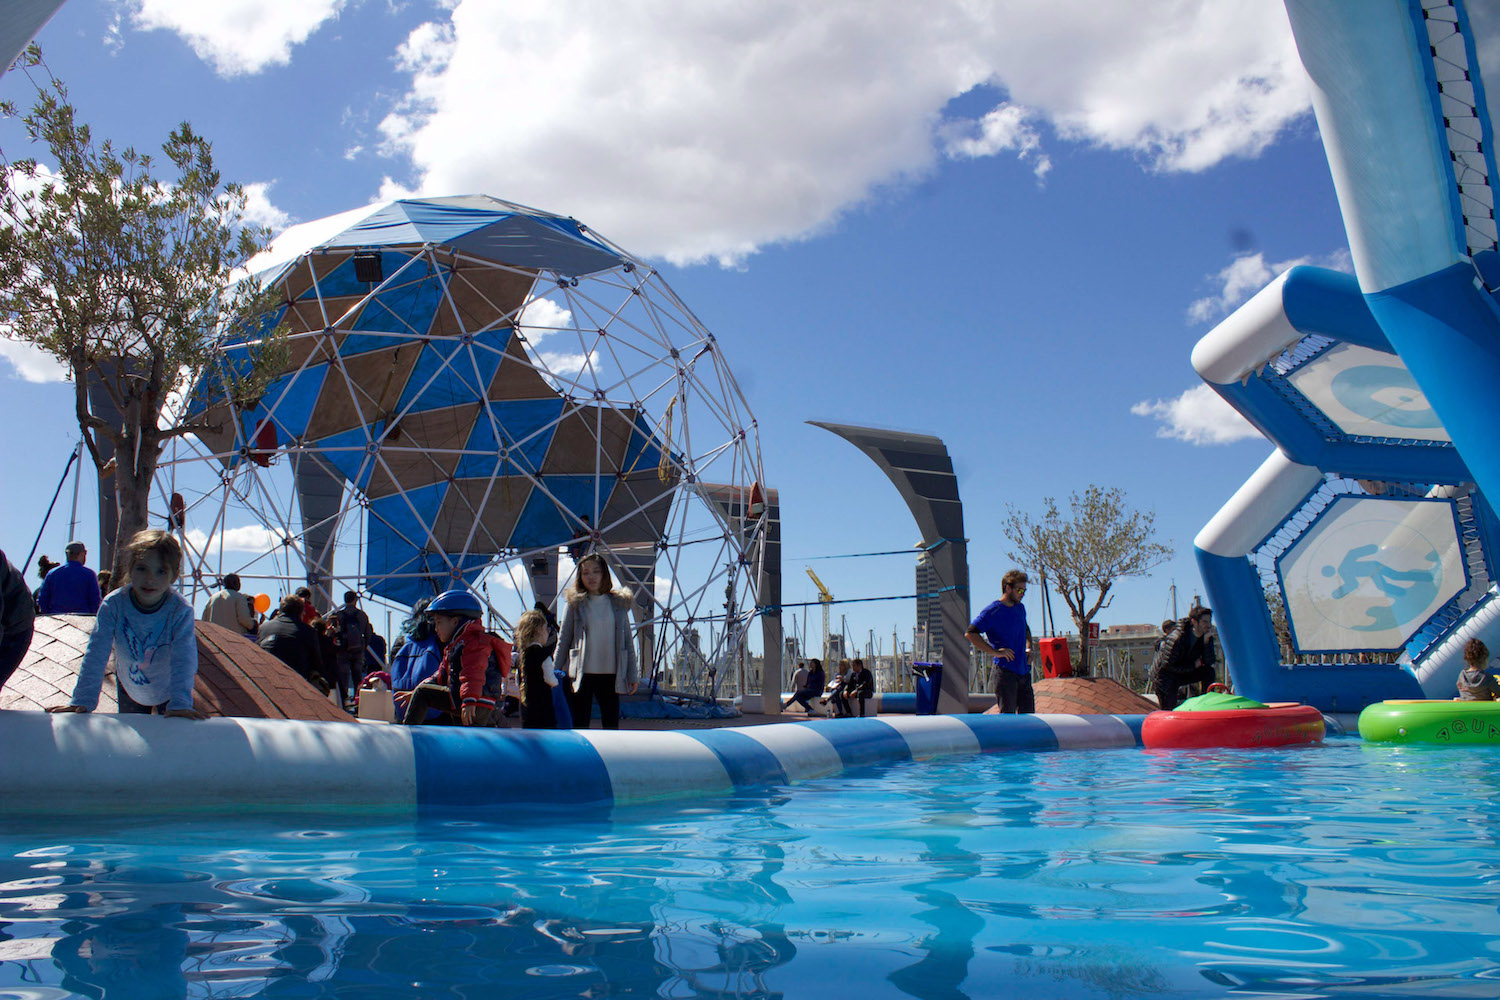   Where hiflying kids play   Bubbleparc is a micro entertainment park that jumps outside the box every summer in the Edinburgh, Falkirk and Barcelona, providing a perfect opportunity for visiting children to let off steam. 